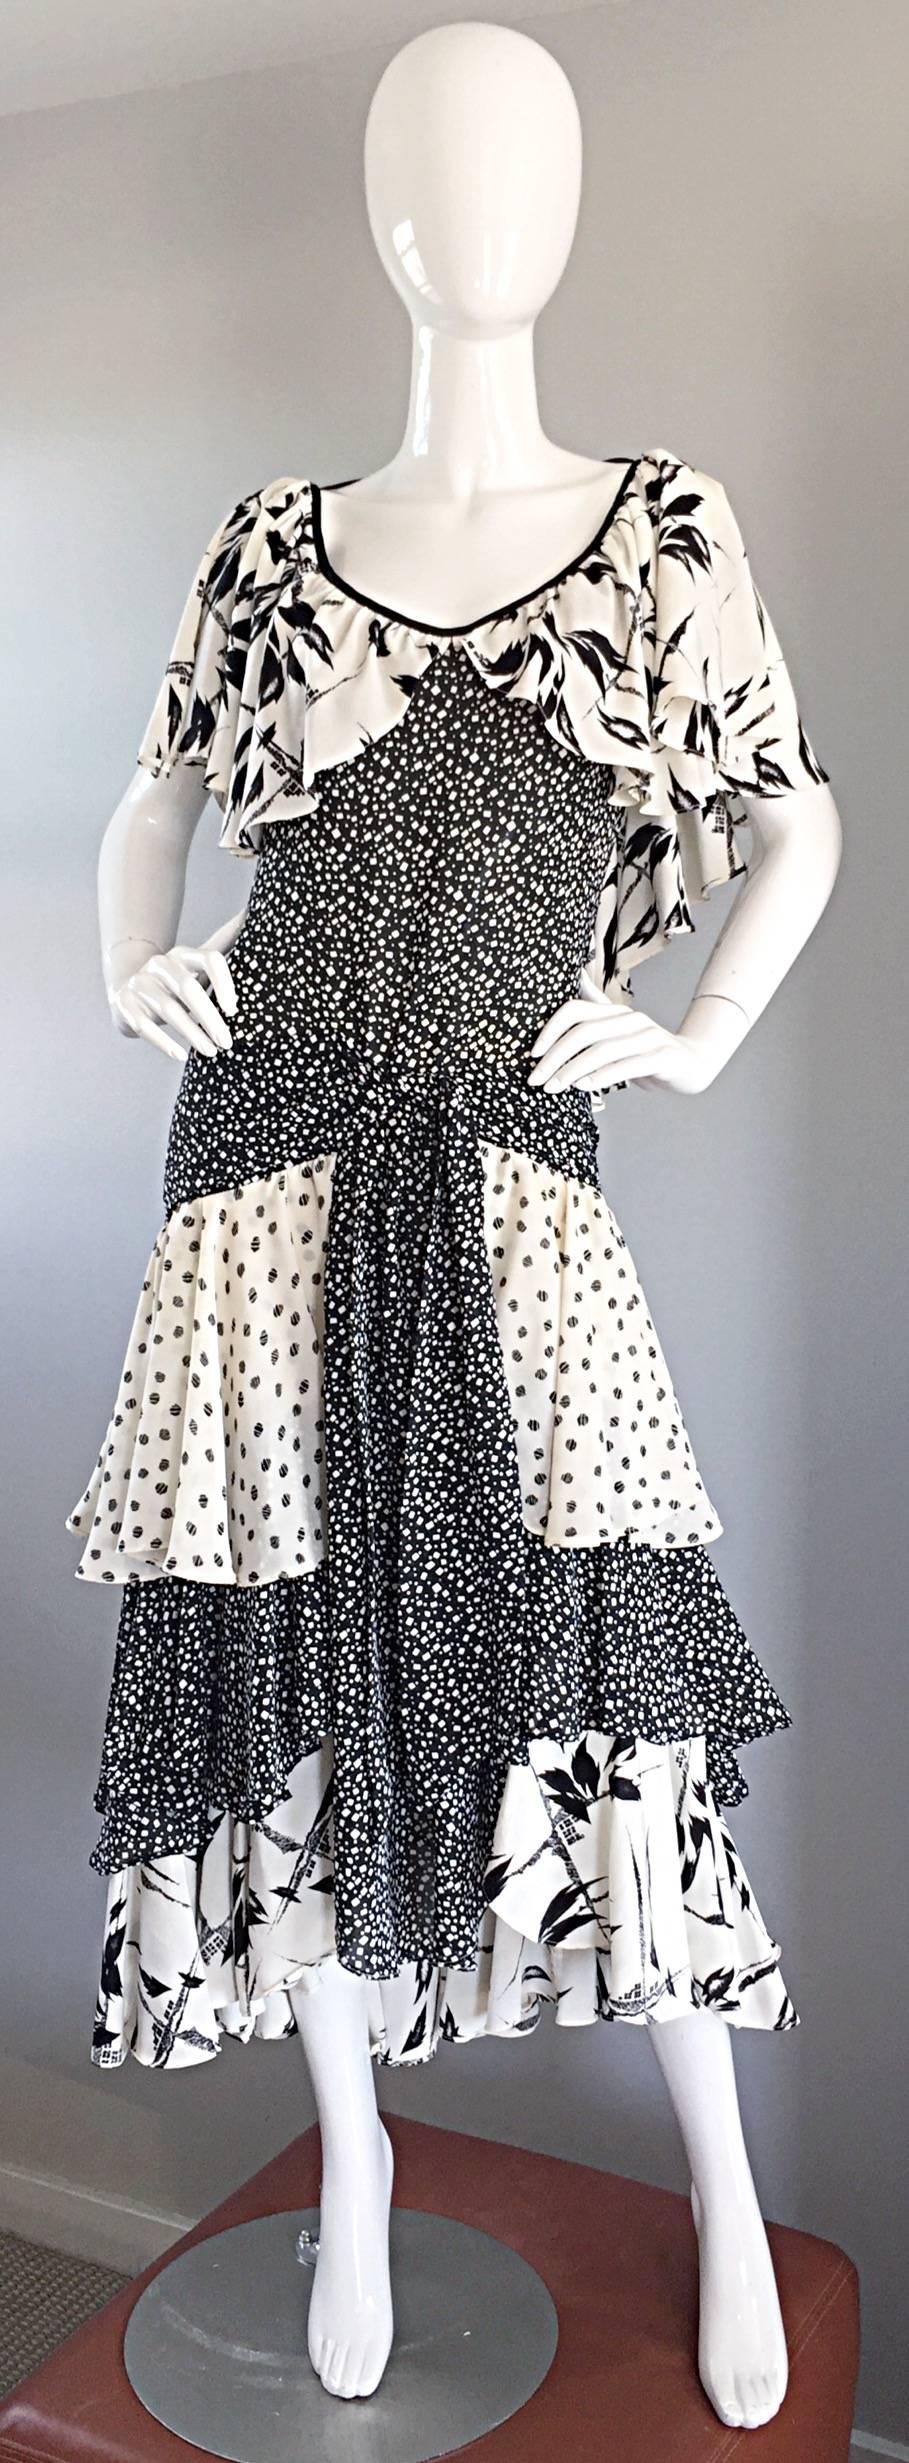 Amazing vintage LORRIE KABALA black and white multi-print dress! So much detail to this beauty, from a hard-to-find sought after vintage designer. Features a ruffled back, with a black tie in the back. Flattering drop waist, with an attached self